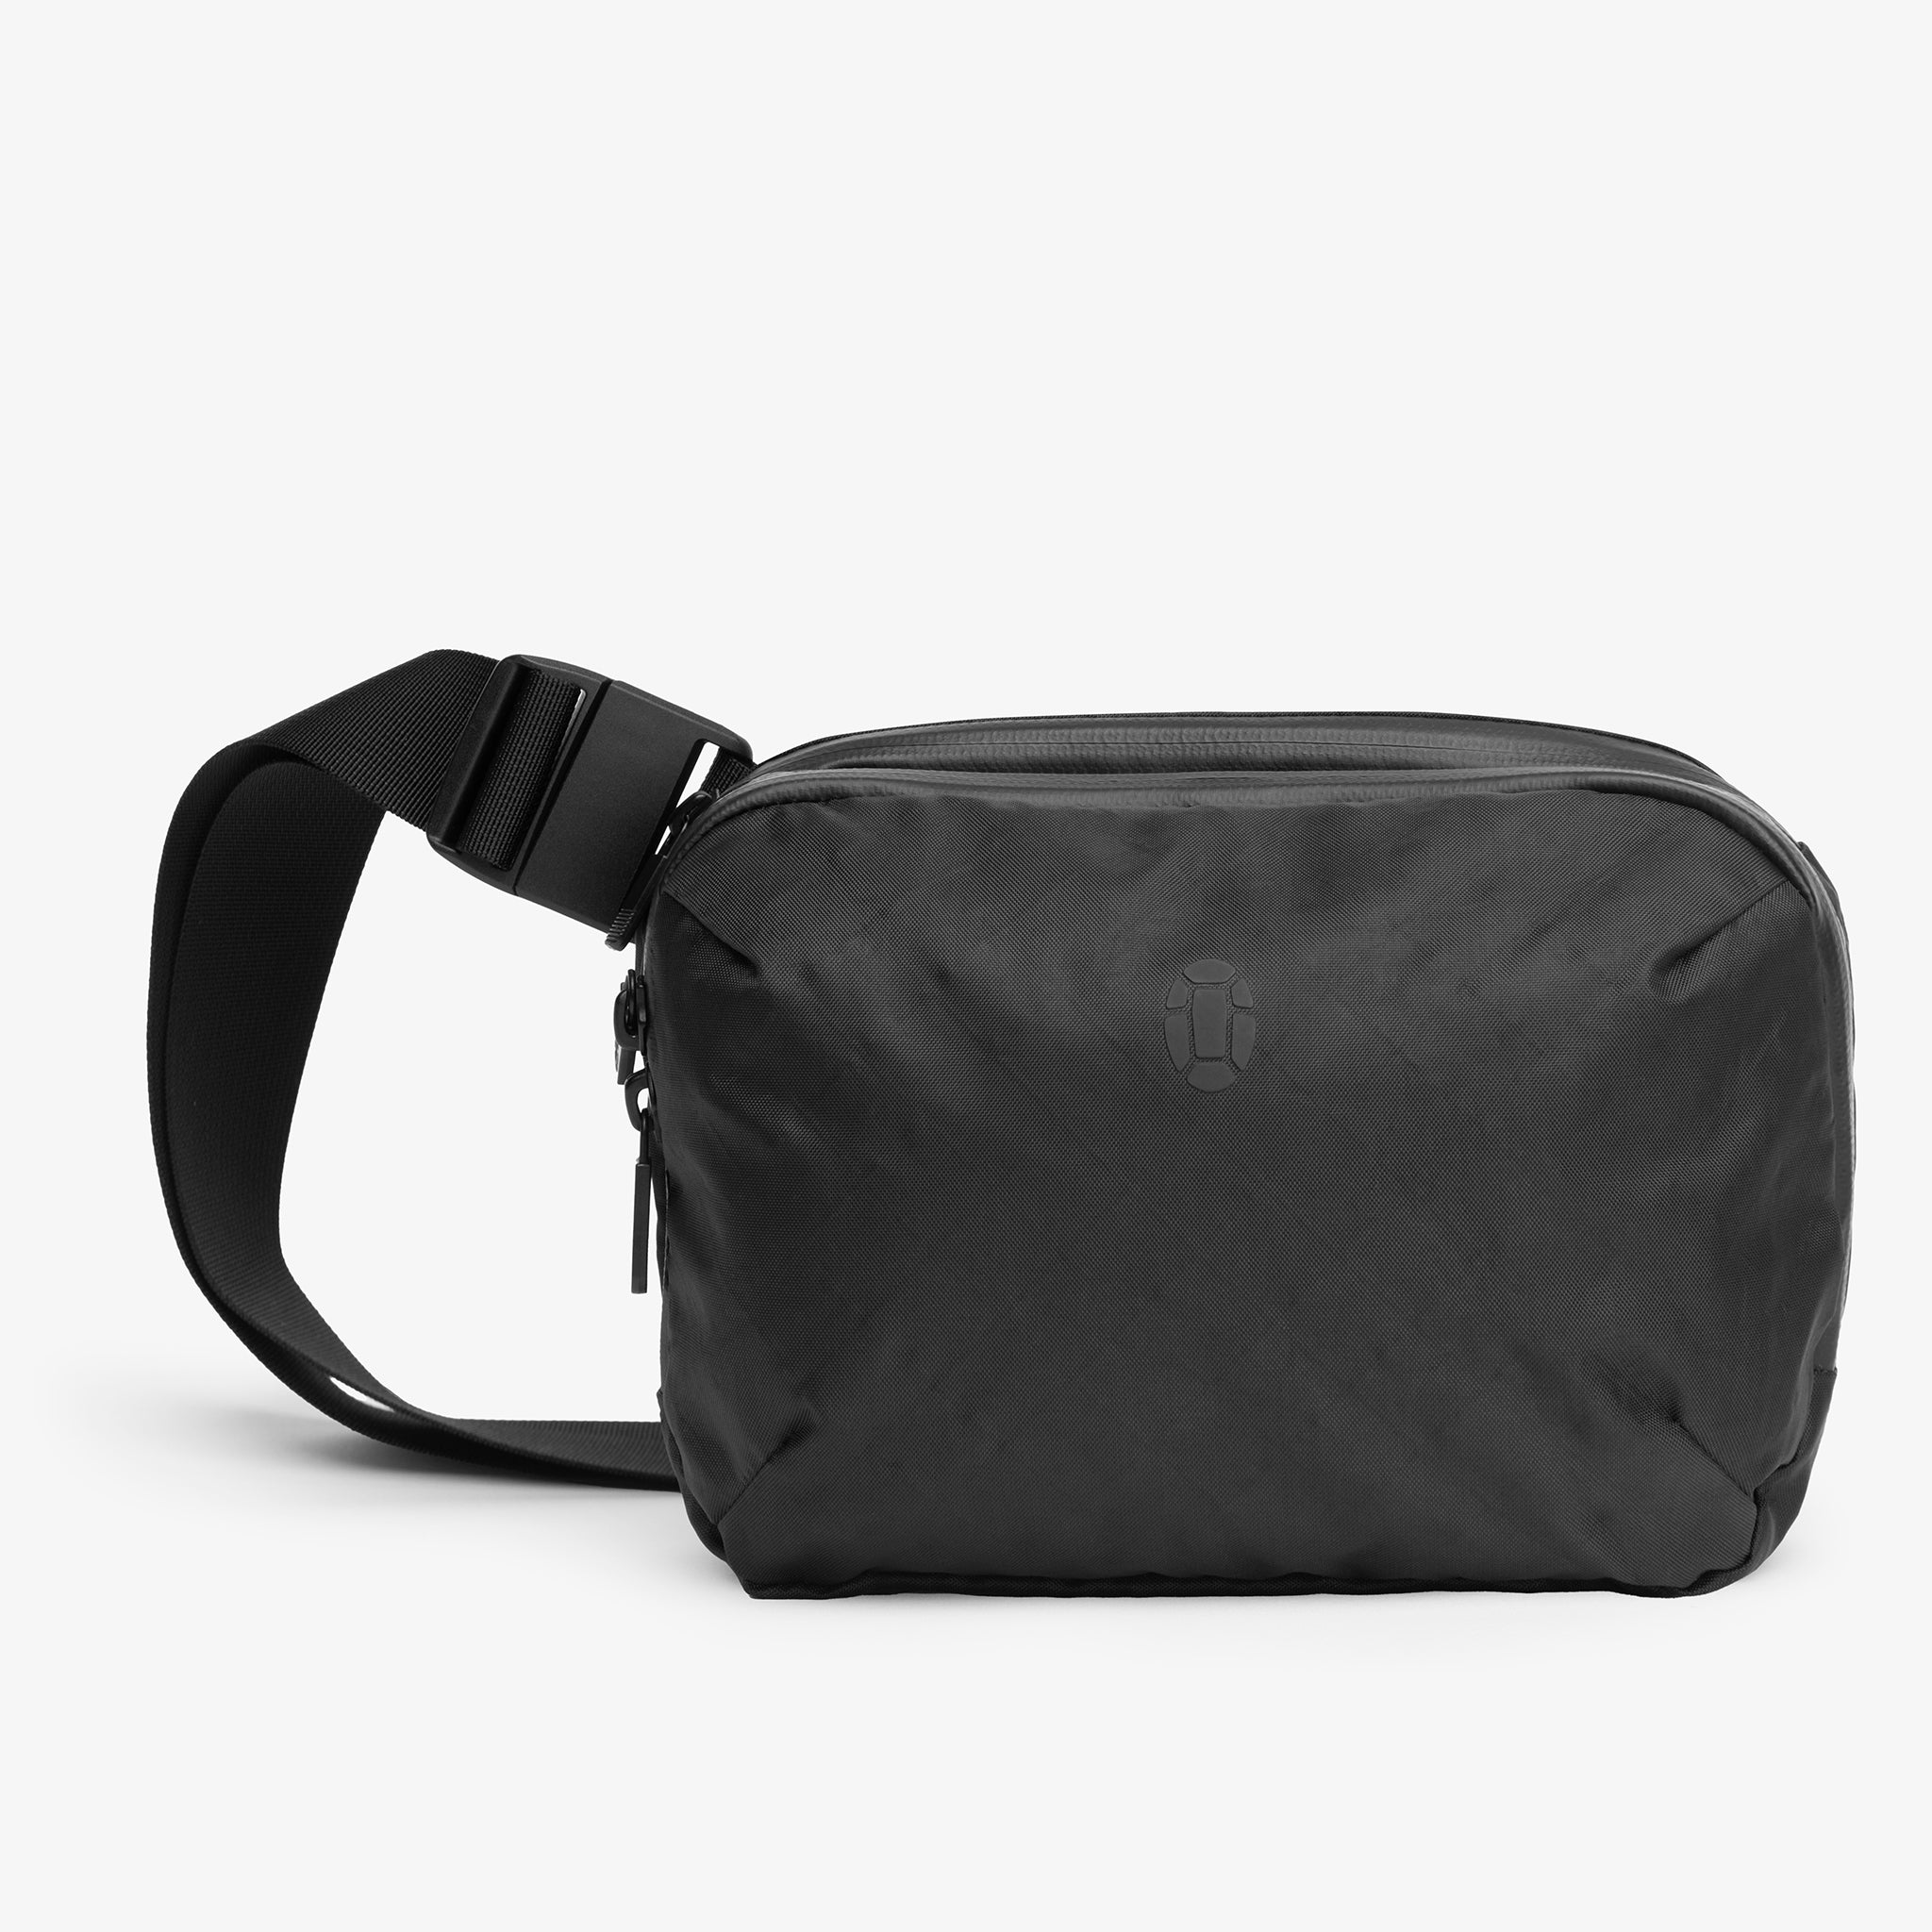 14 Best Sling Bags for Women to Hold Sightseeing Essentials